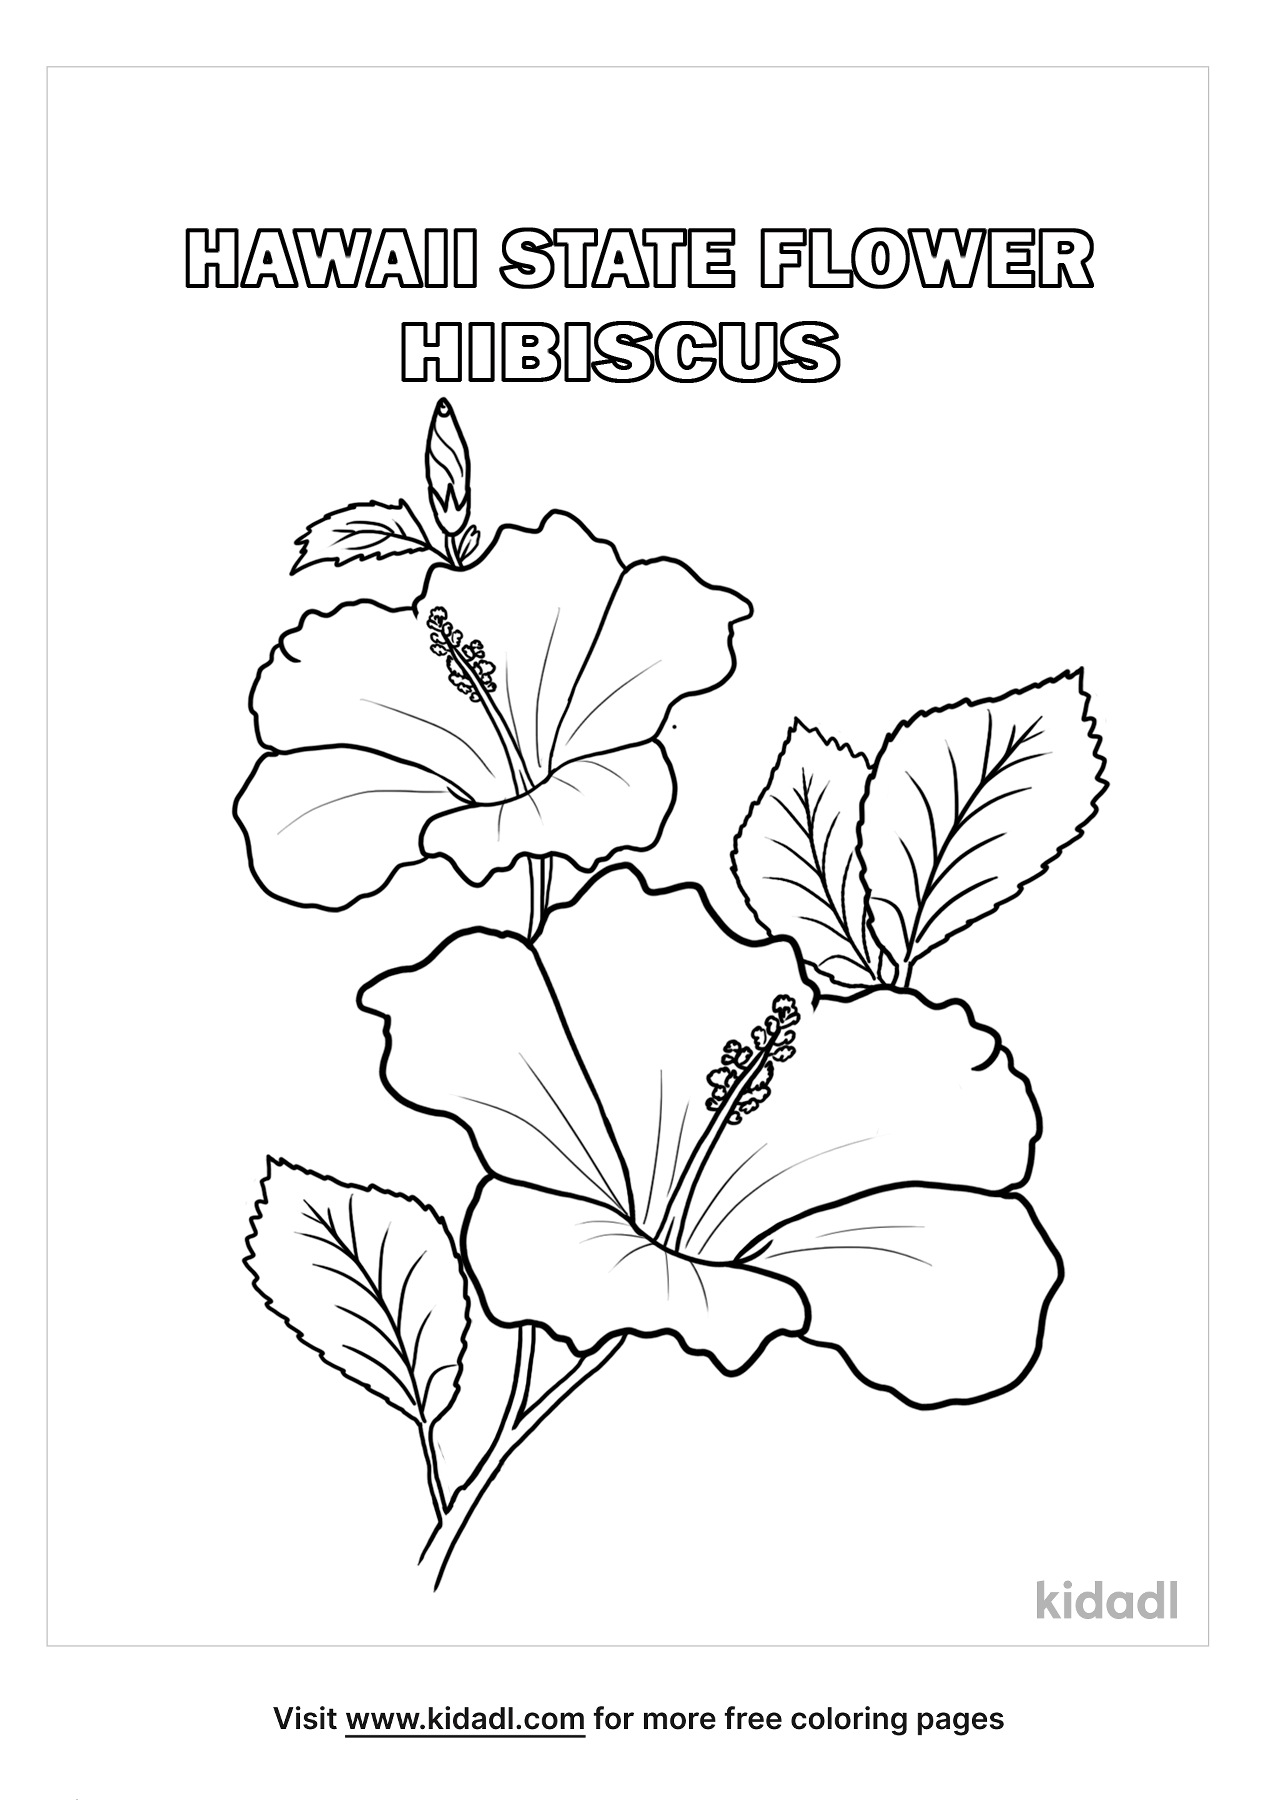 Hawaii State Flower Coloring Pages | Free Flowers Coloring Pages | Kidadl